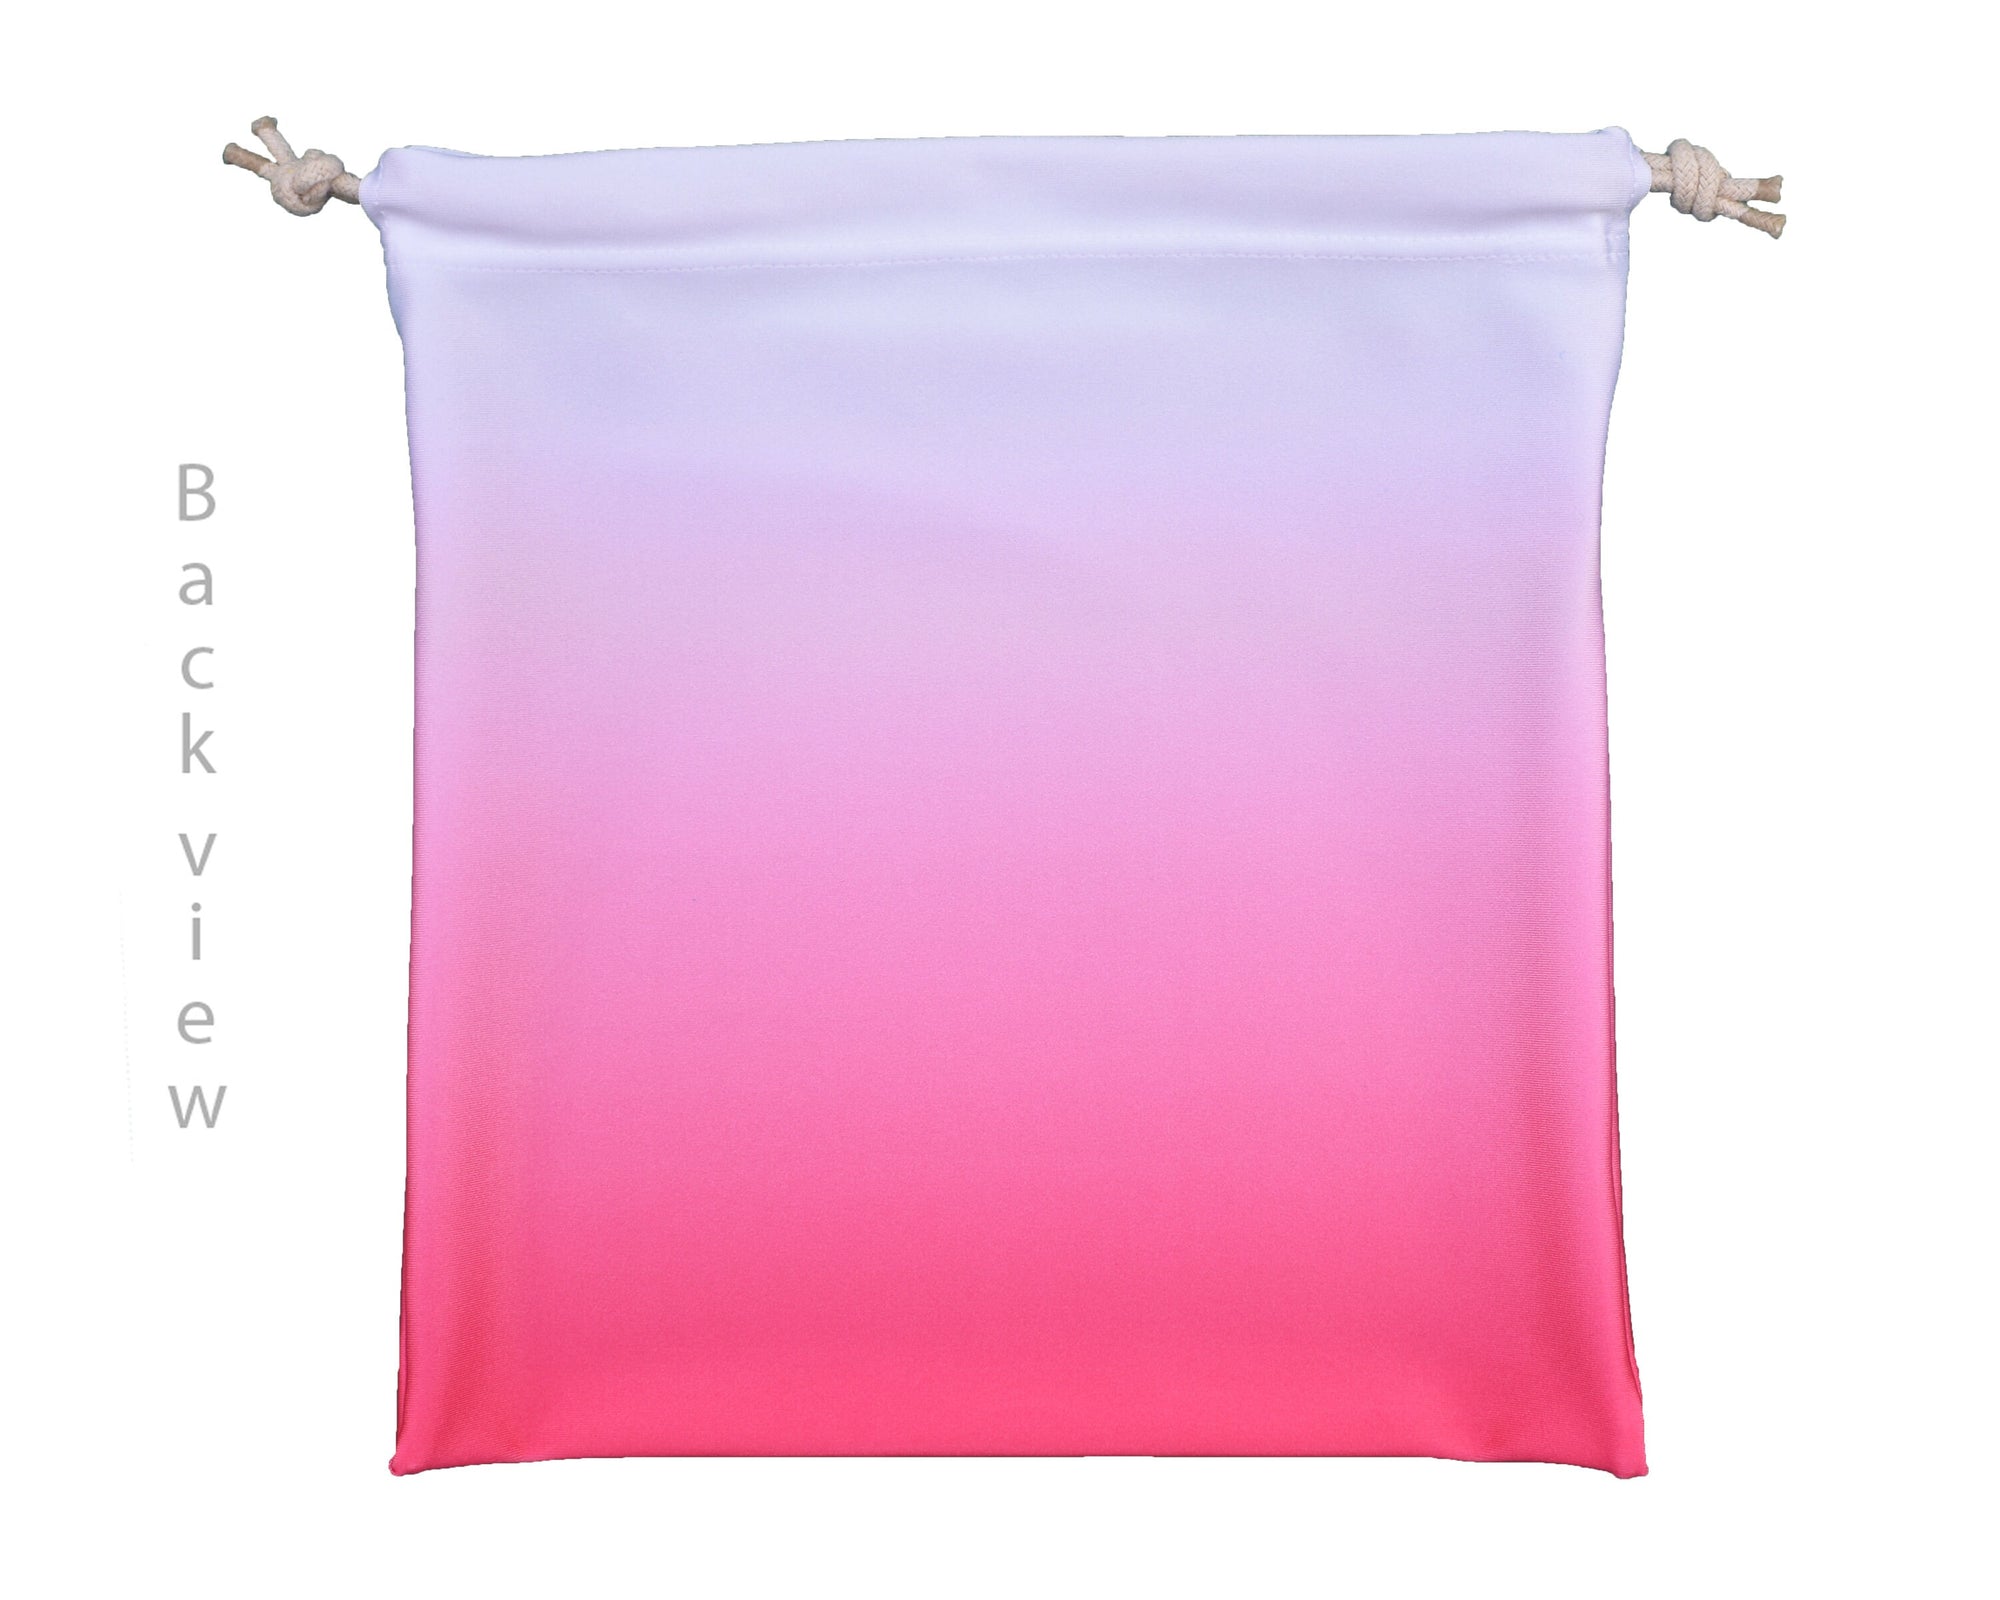 Personalized Gymnastics Grip Bag in Dark Coral White Ombre